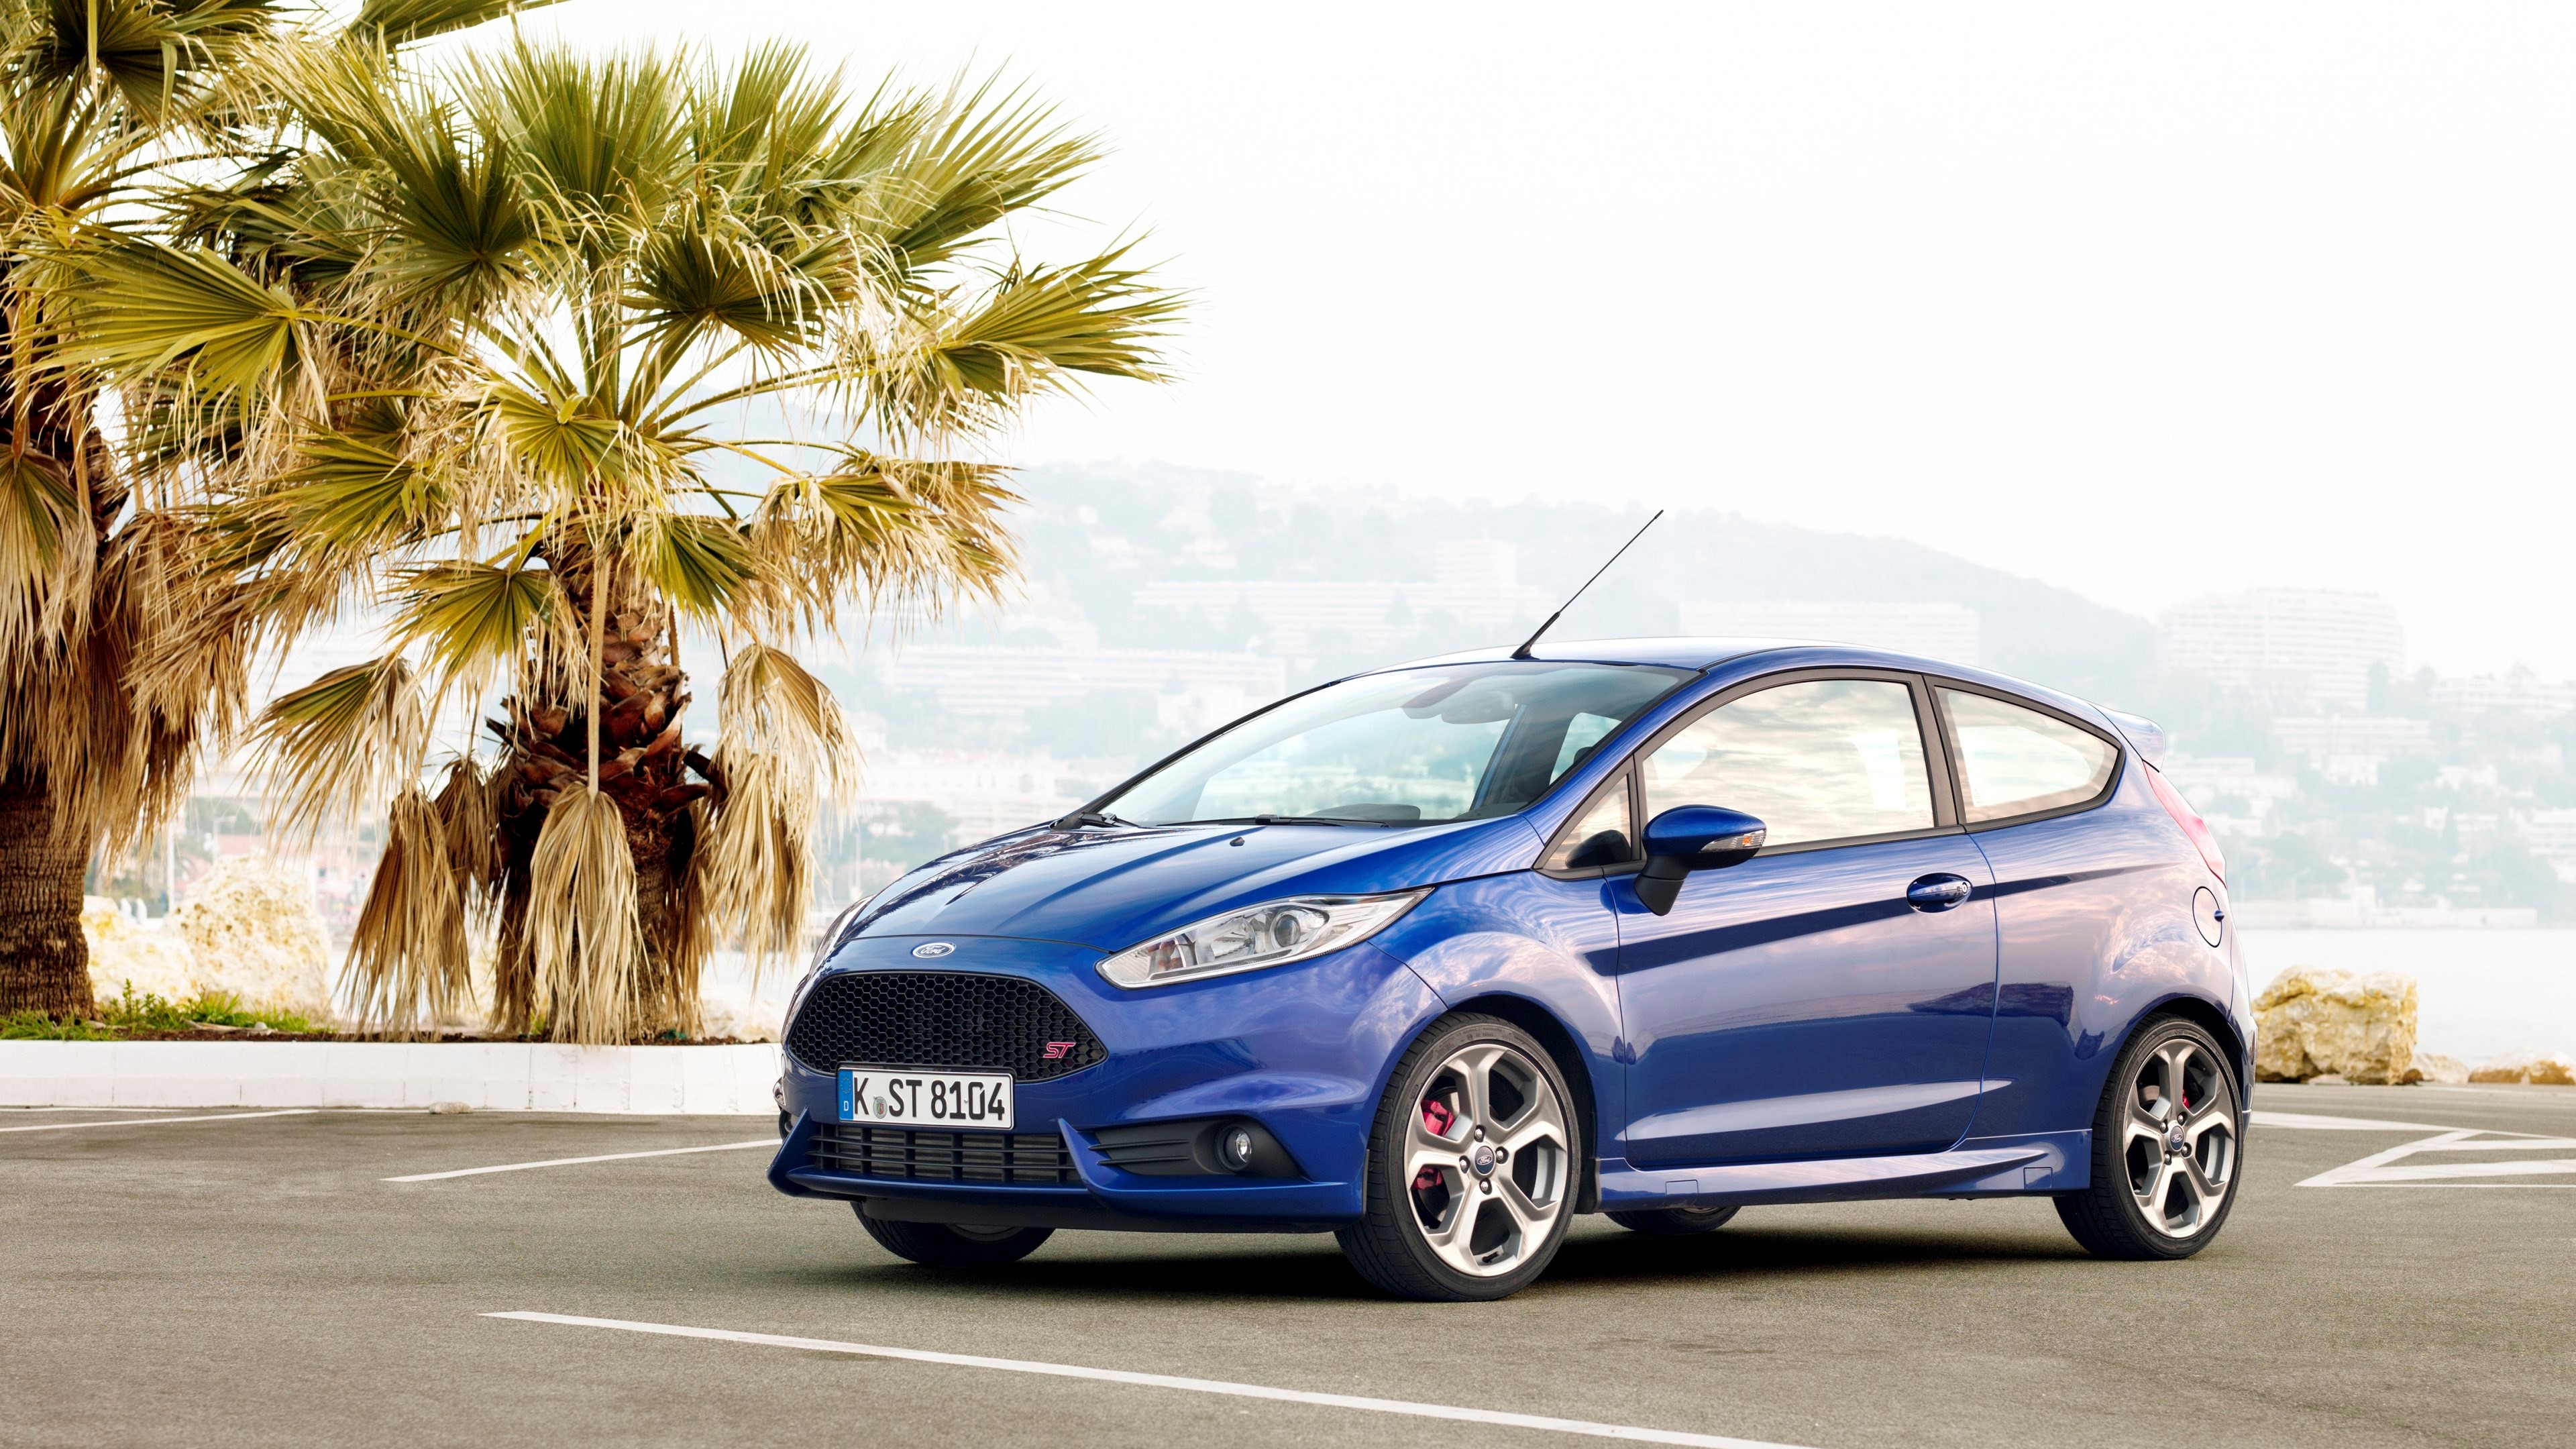 Ford Fiesta Full Hd Pictures 3840x2160